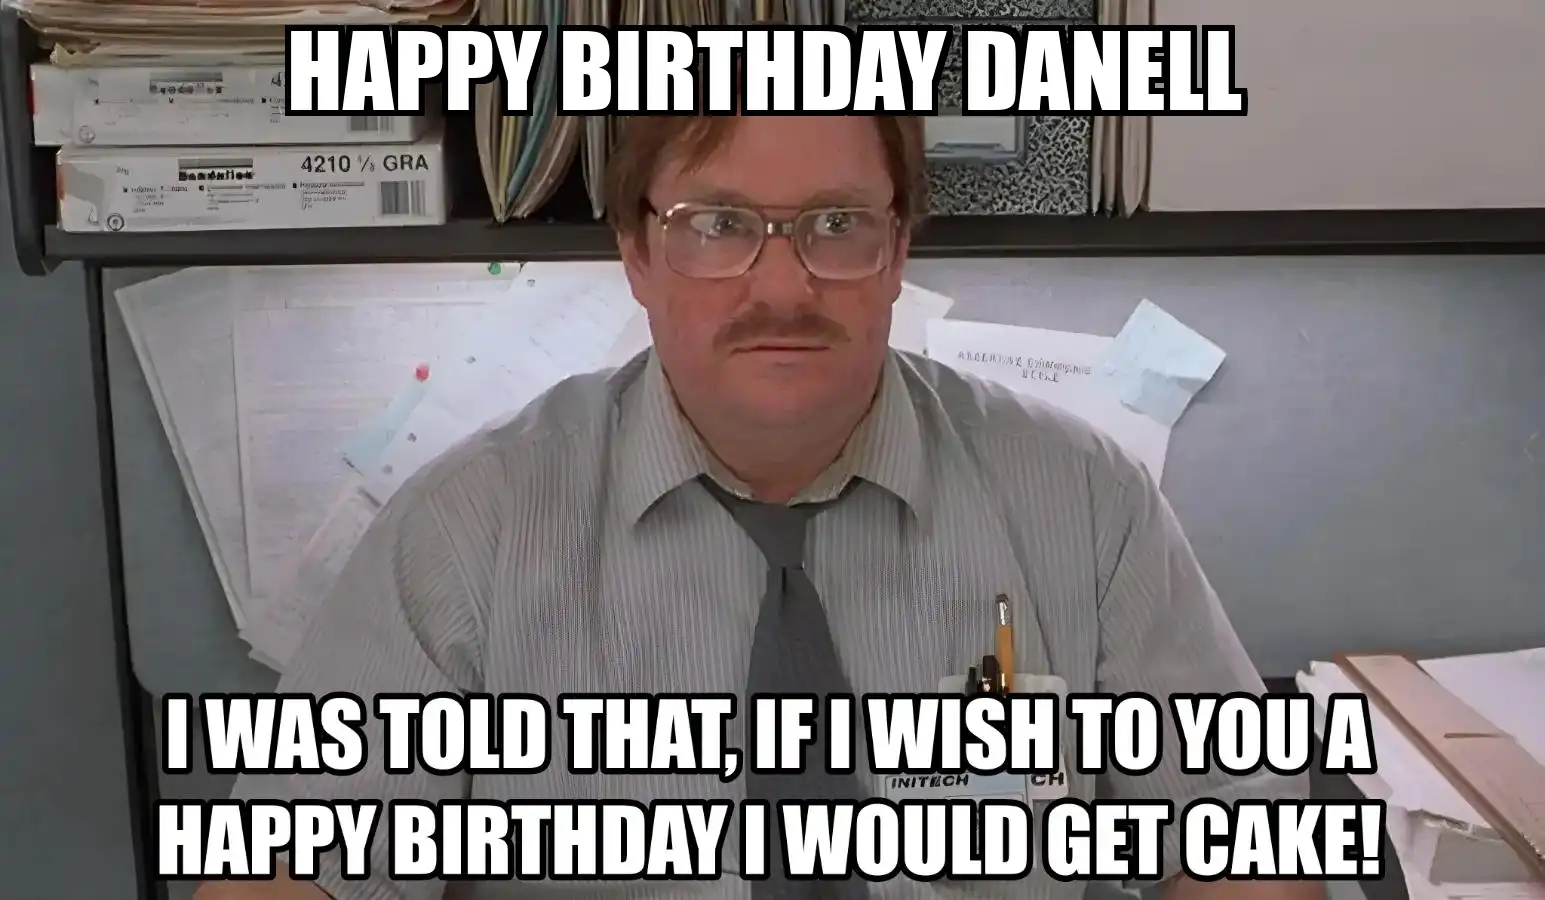 Happy Birthday Danell I Would Get A Cake Meme